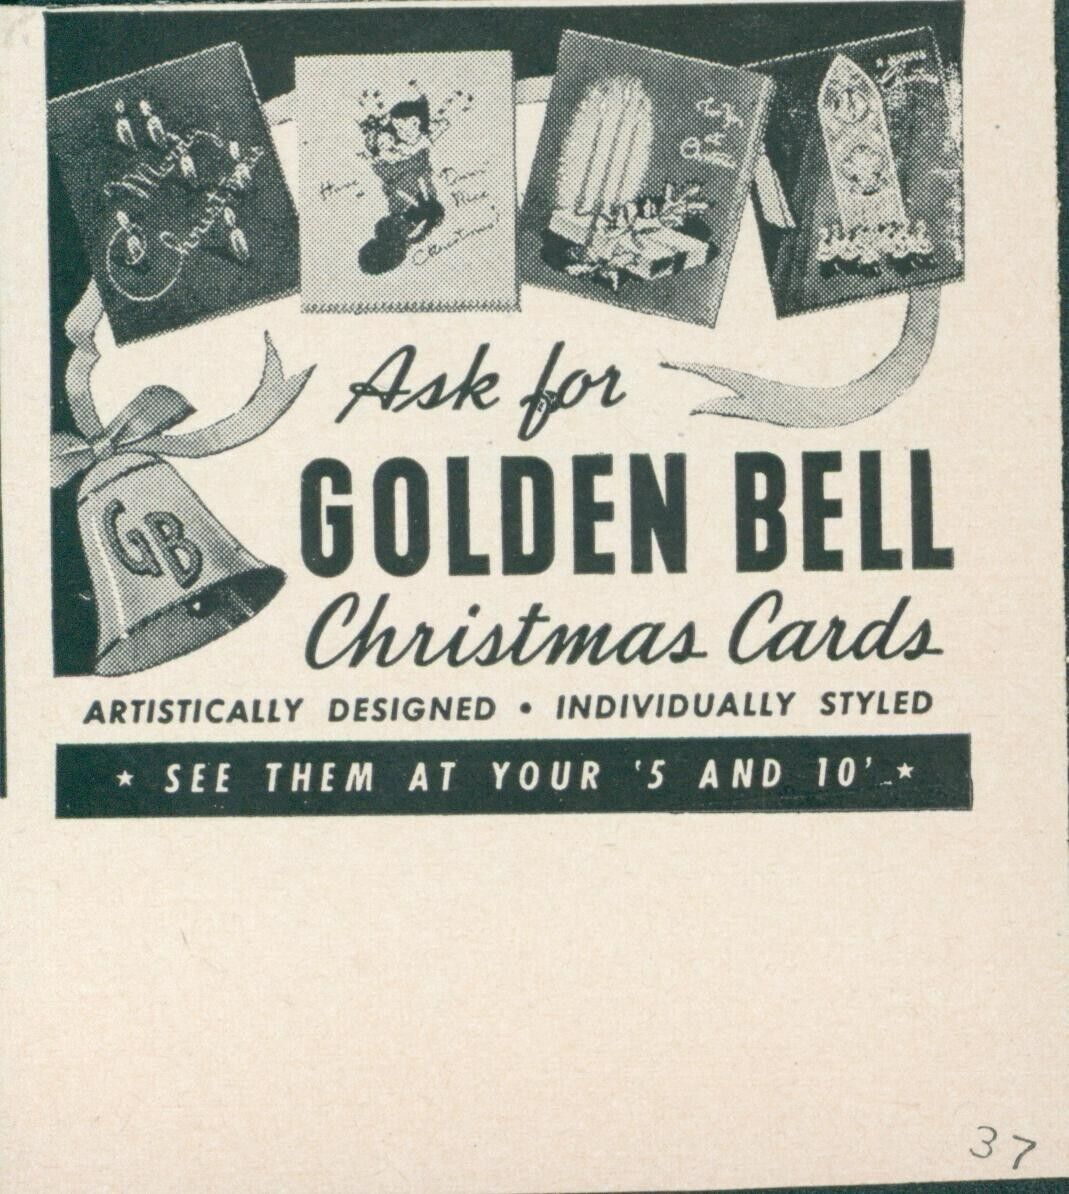 1941 Golden Bell Christmas Cards Artistically Designed At 5 & 10 Ad L39